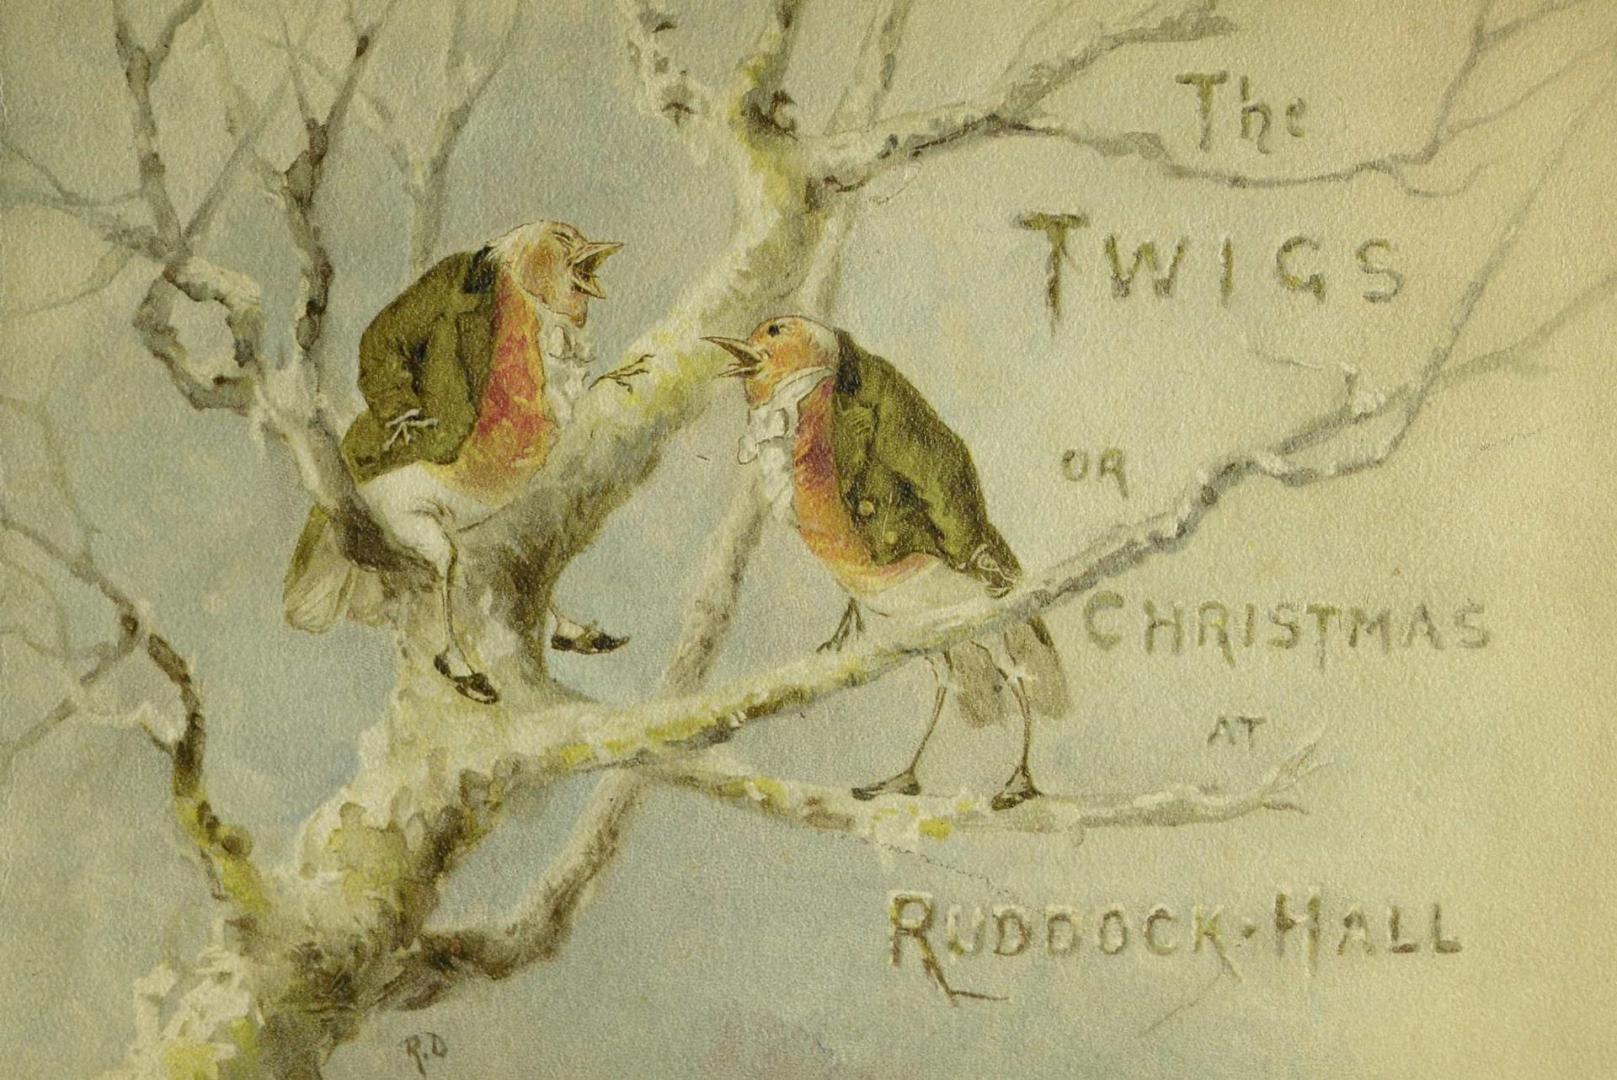 The twigs, or, Christmas at Ruddock Hall / illustrations by Robert Dudley